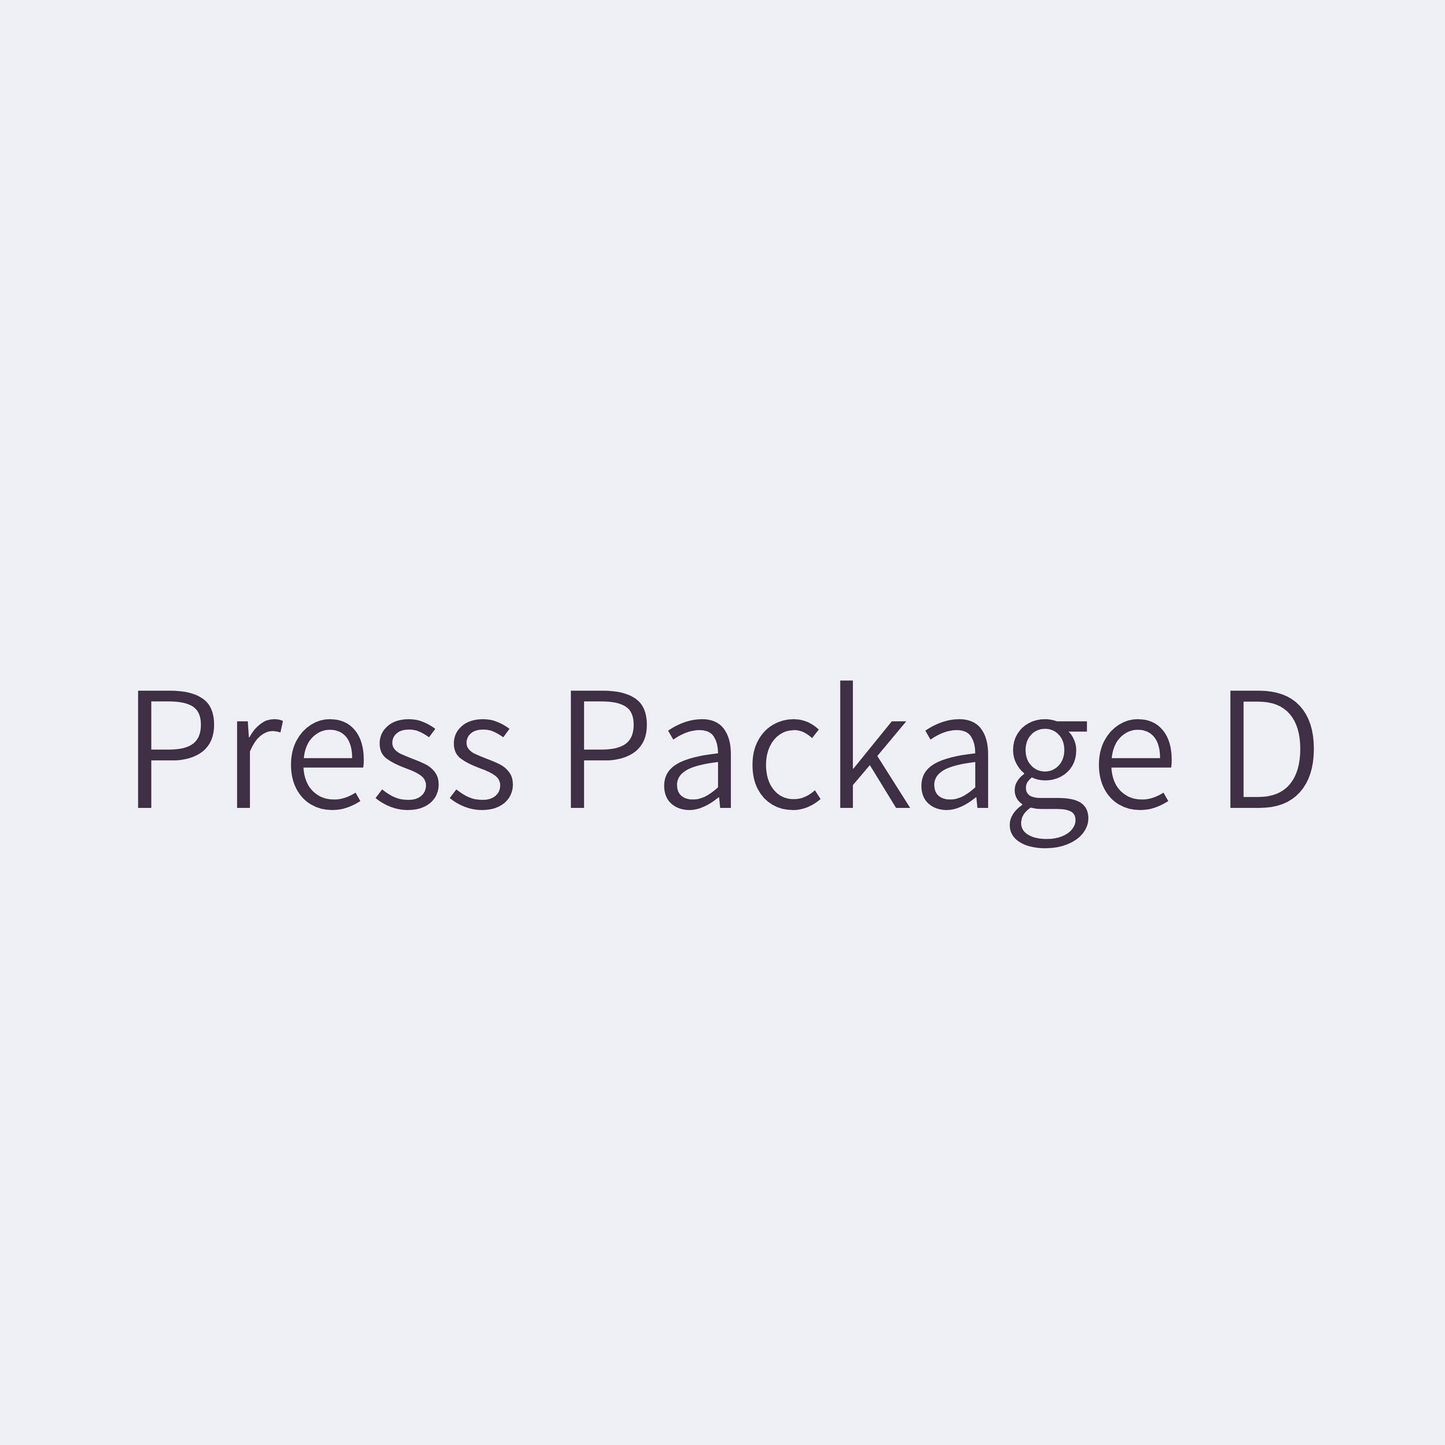 Press Package D